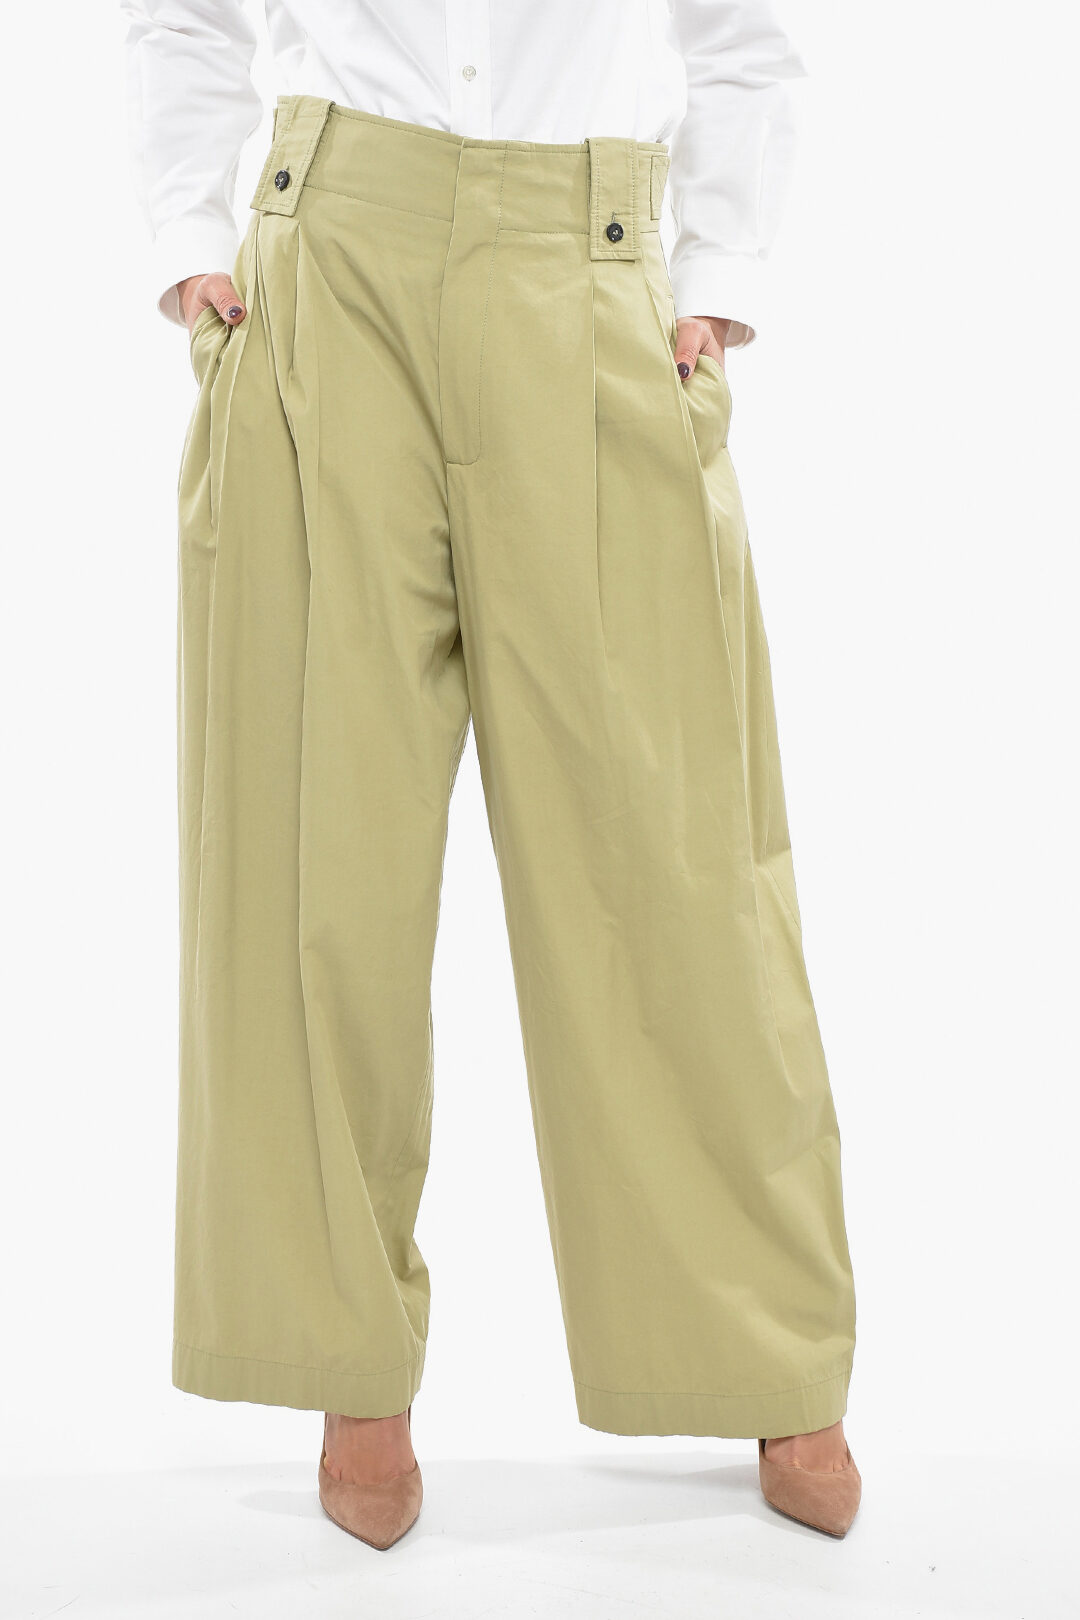 Woolrich Cotton Stretch AMERICAN Pants with Belt Loops women - Glamood  Outlet